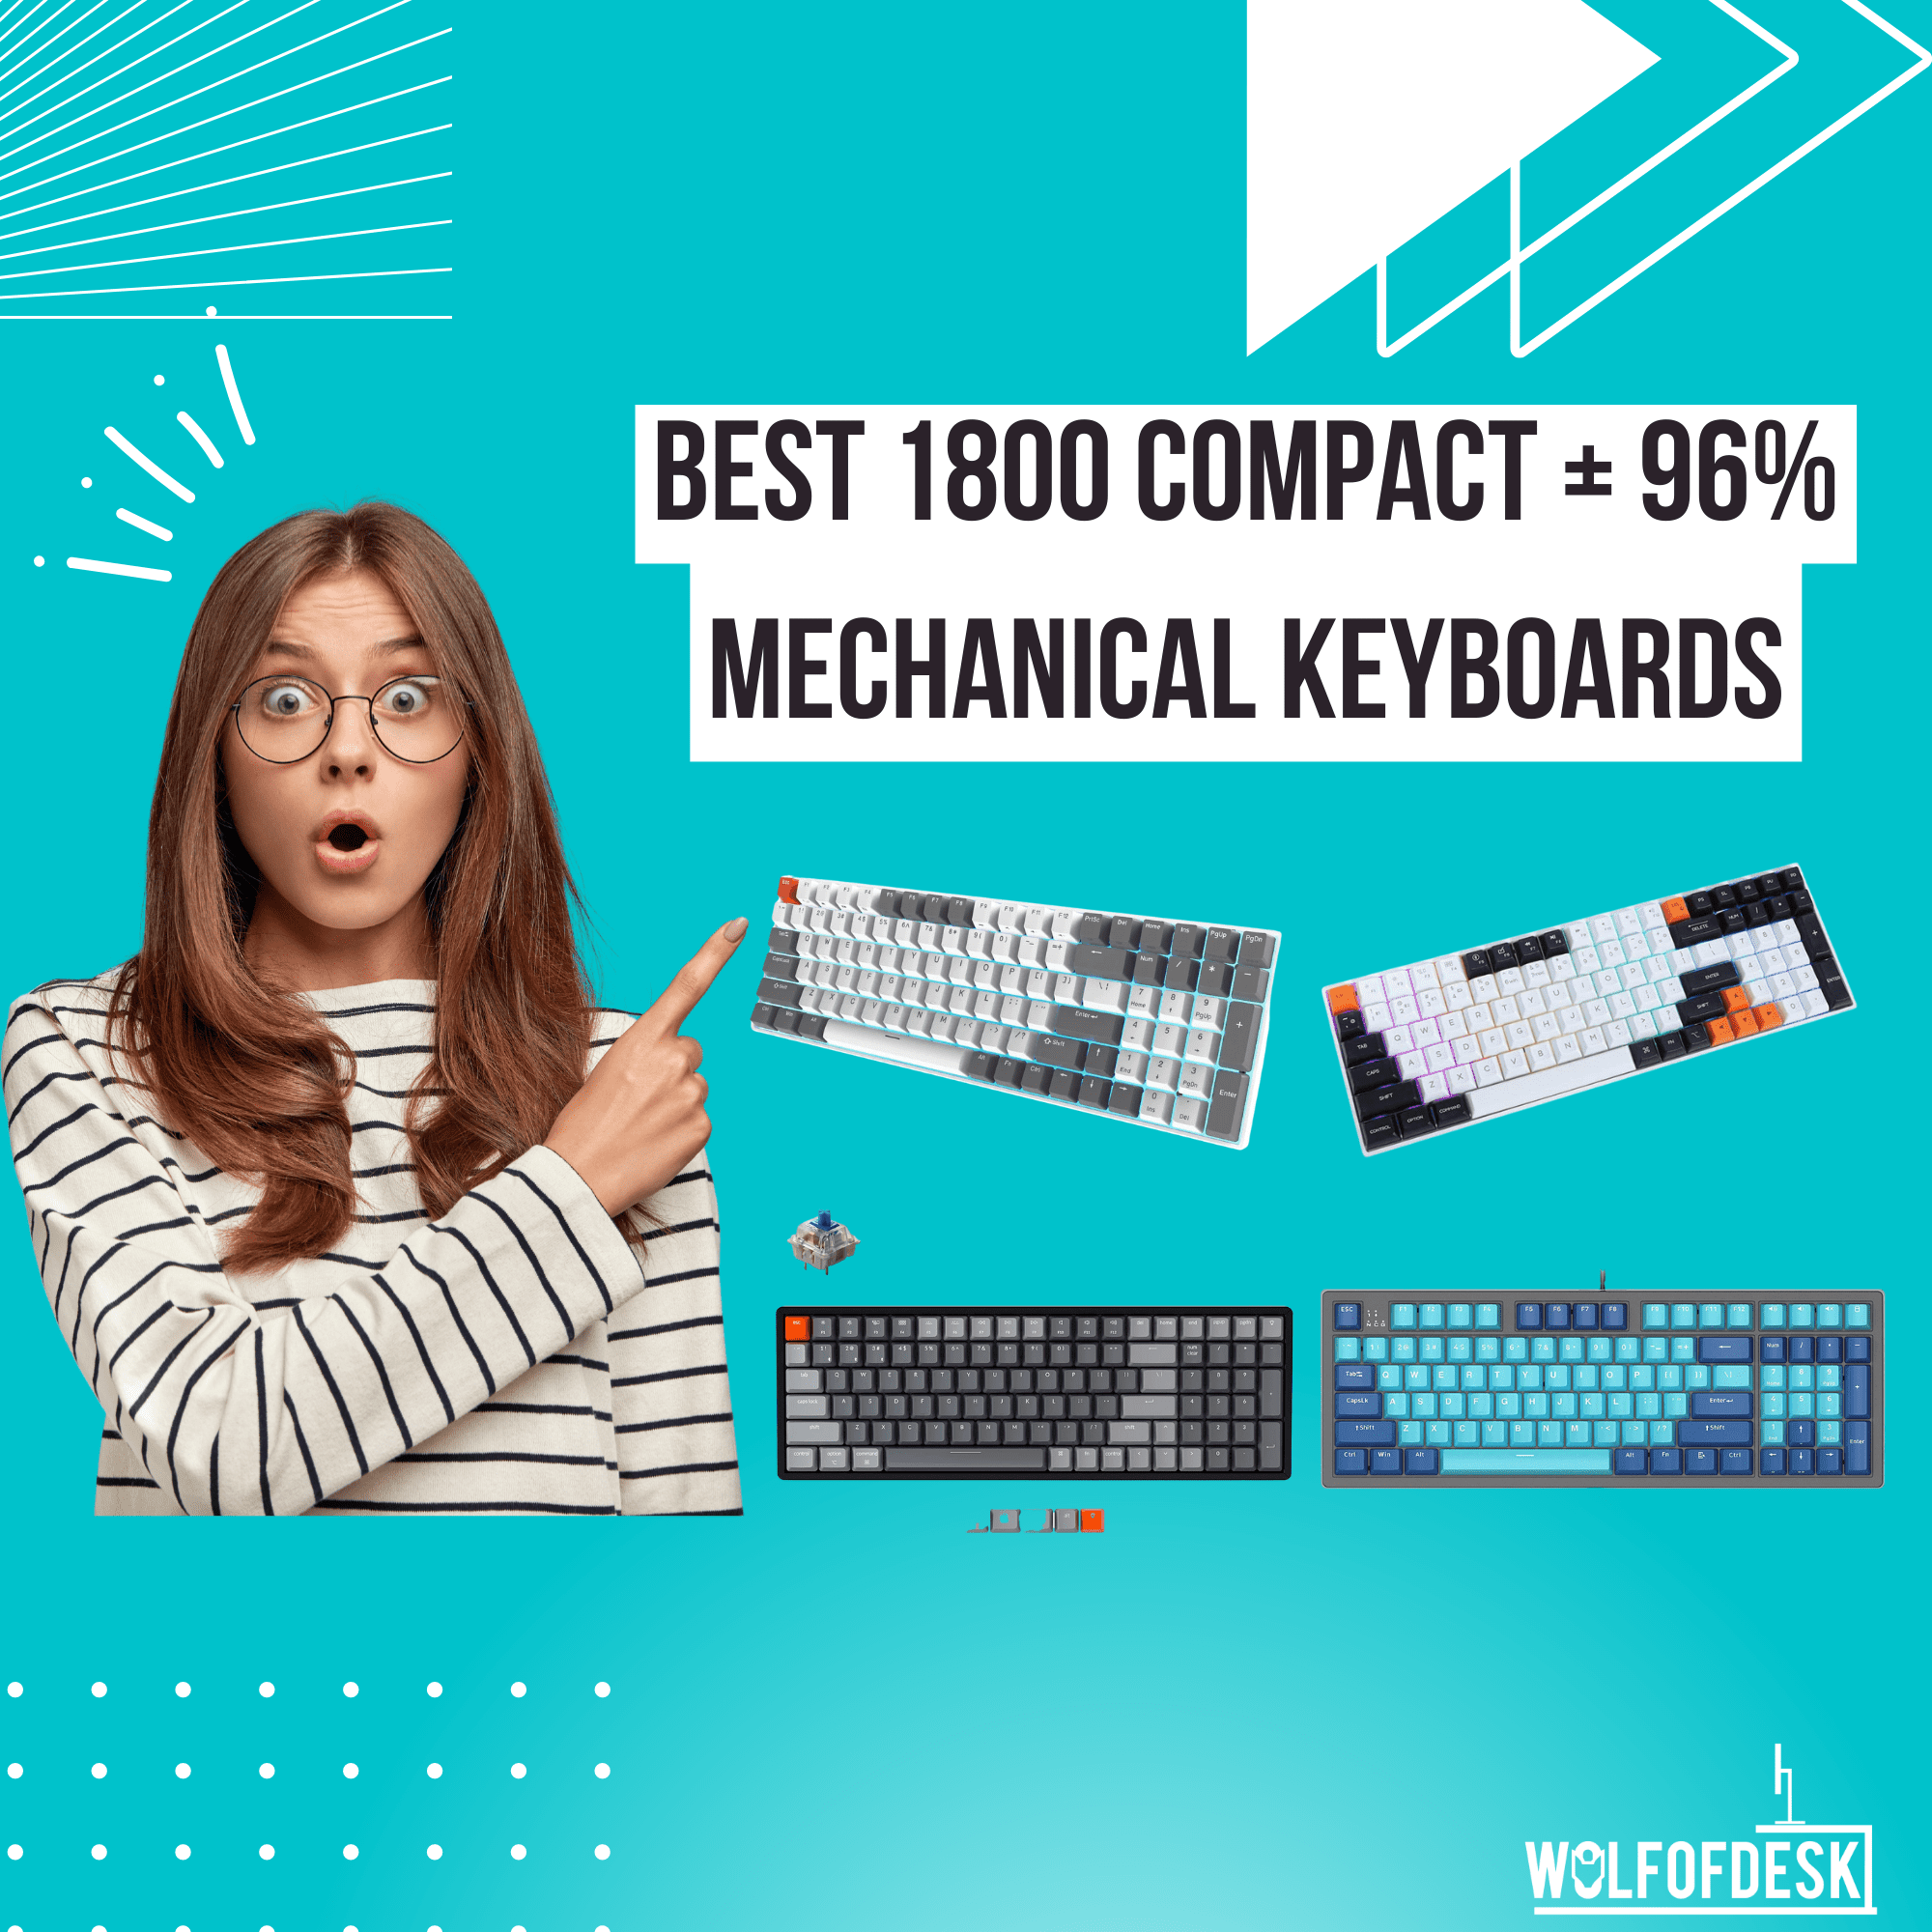 best 1800 compact + 96 percent mechanical keyboards